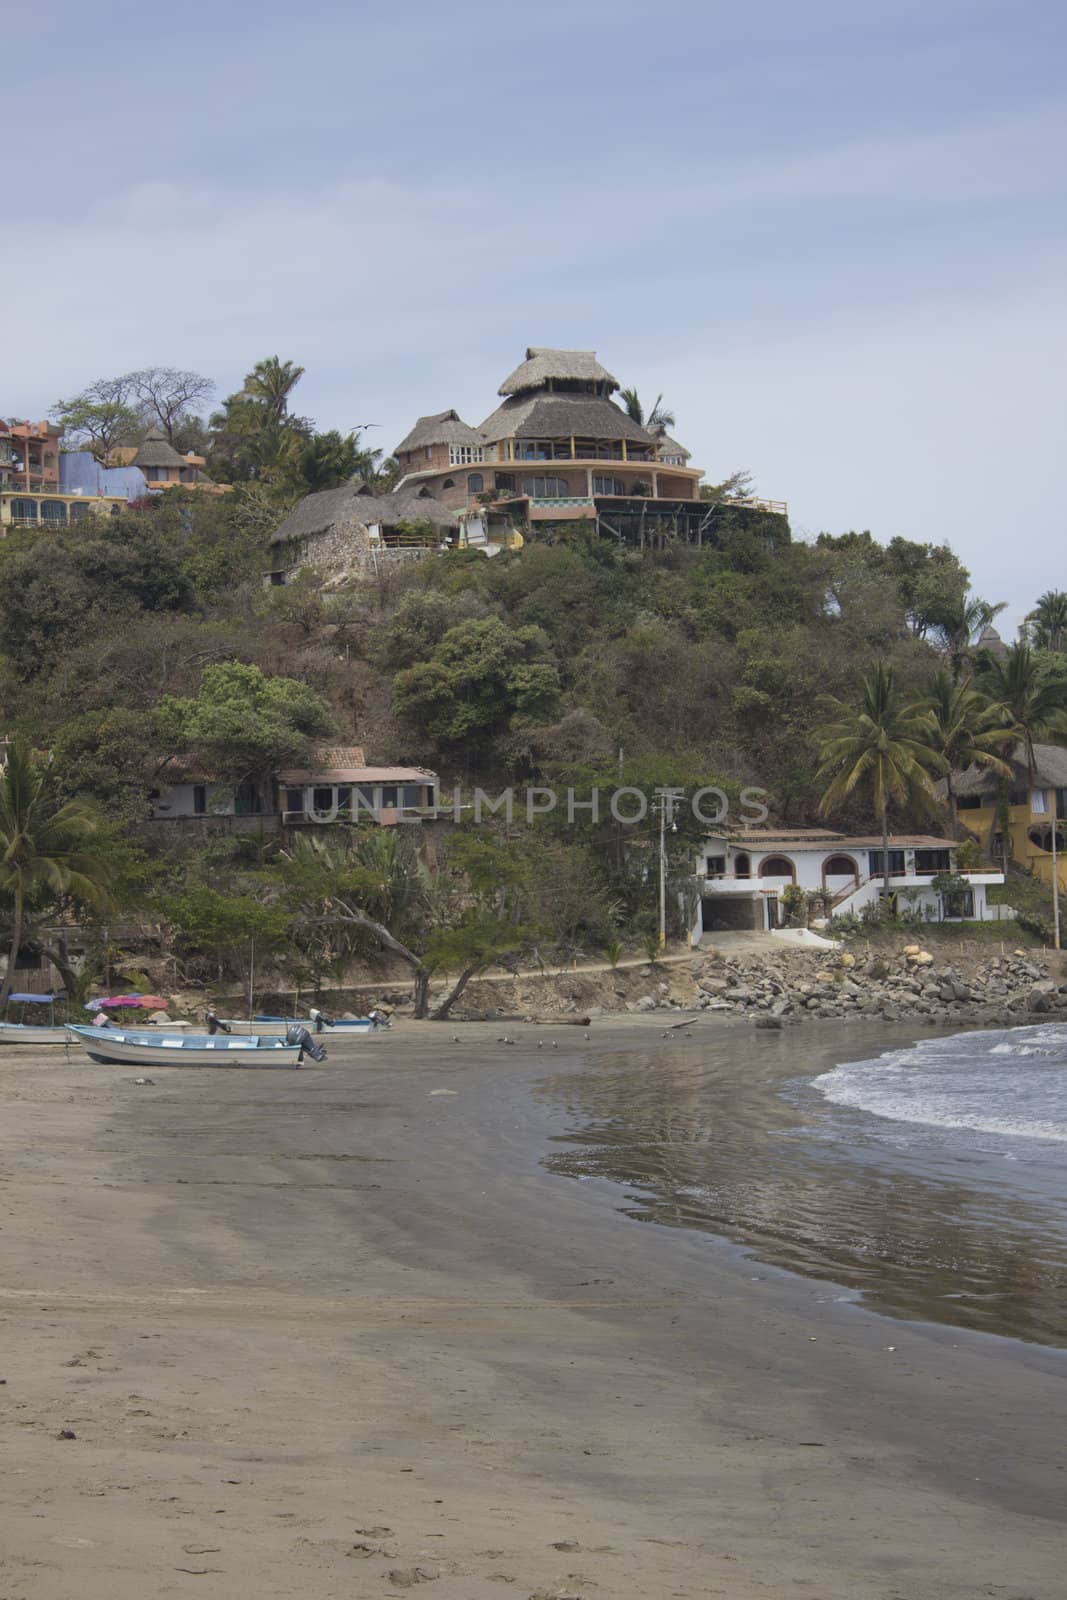 Very nice large homes looking over a beach in Mexico